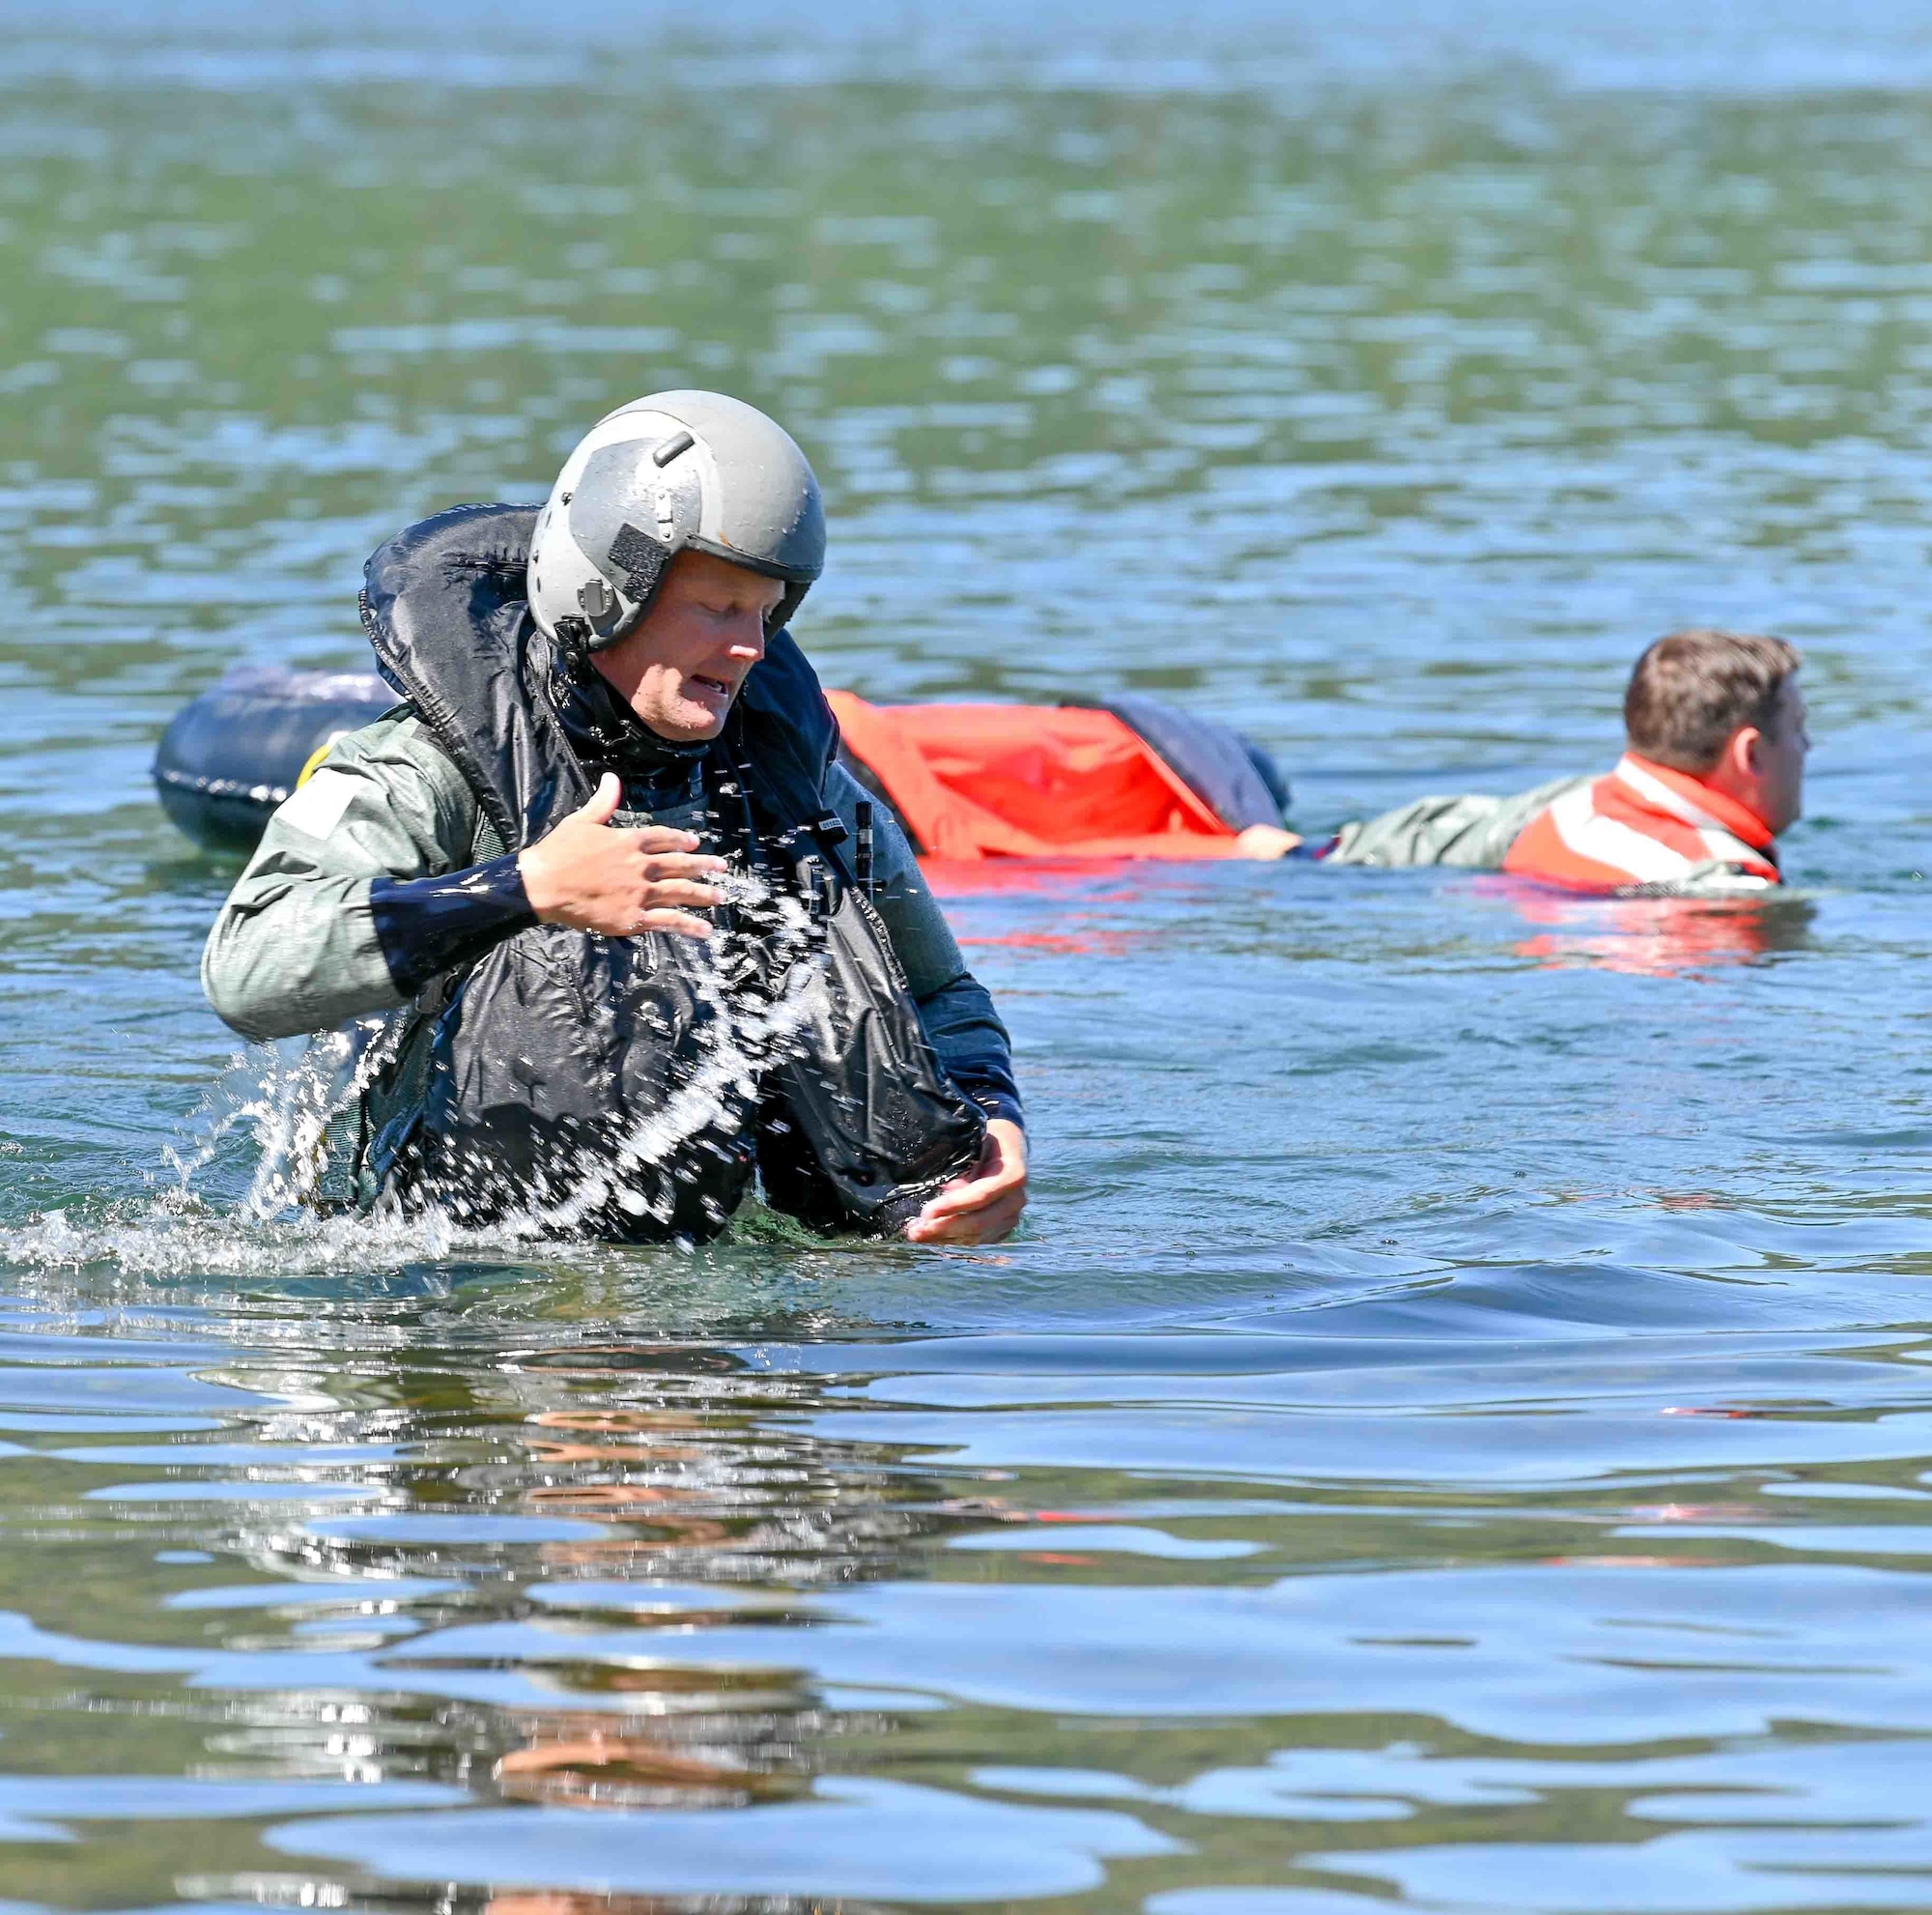 U.S. Air Force Col. Lee Bouma, the 173rd Fighter Wing commander, wades out of the water following his circuit through several water survival training scenarios prepared by 173rd FW Aircrew Flight Equipment at Cultus Lake in Central Oregon, July 16, 2022.